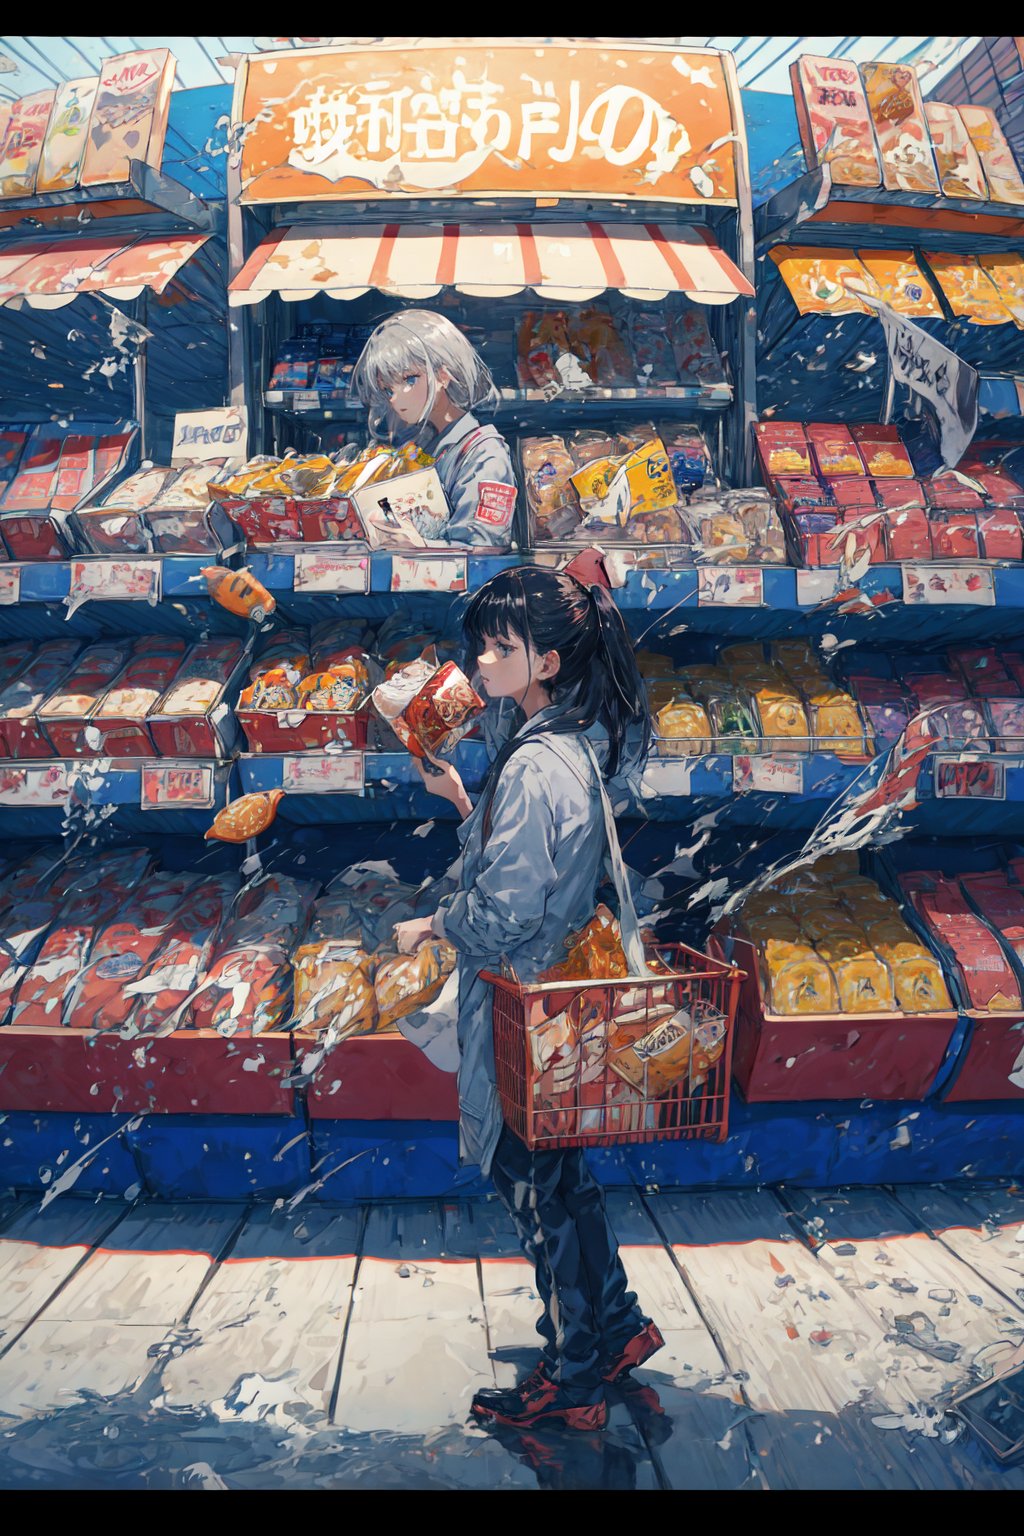 16K, HD, mastepiece, detailed background

A girl in convenience store looking a at snacks. Shes holding a basket with stock items inside and seems to be a bit tired.